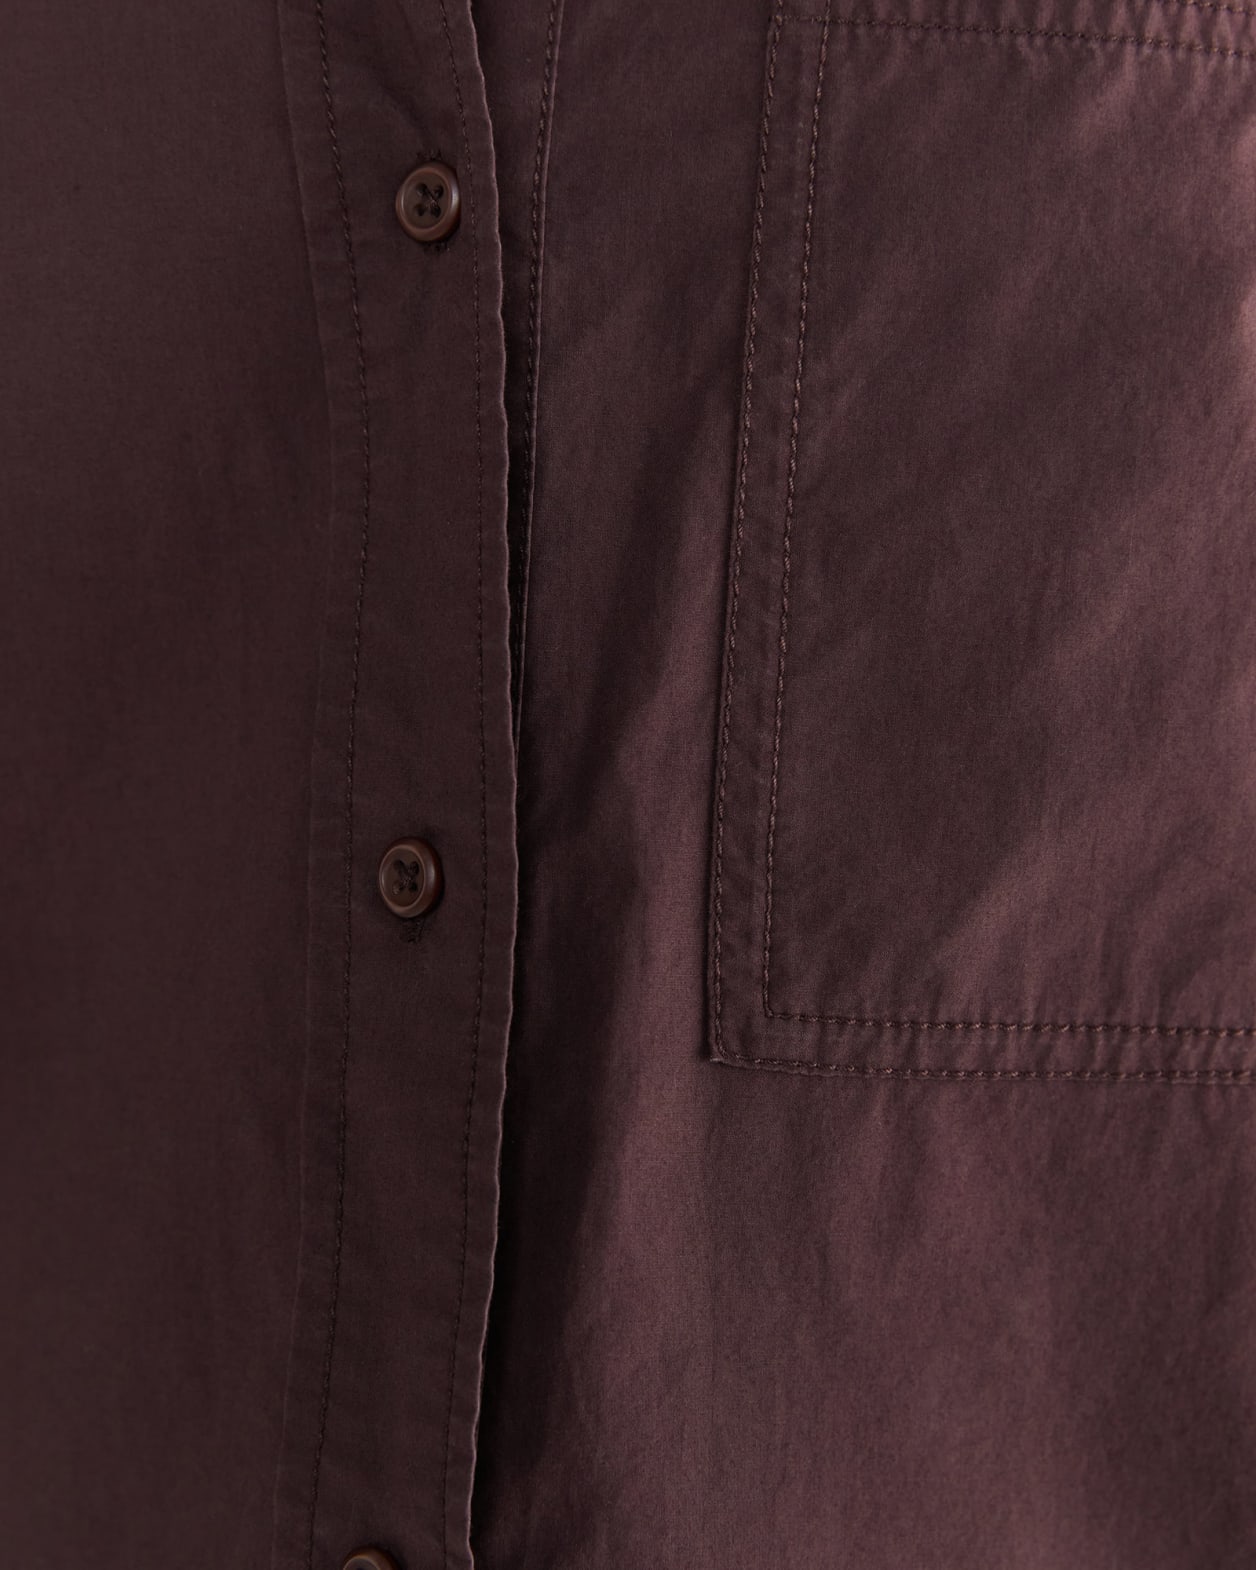 Organic Cotton Relaxed Shirt in CHOCOLATE